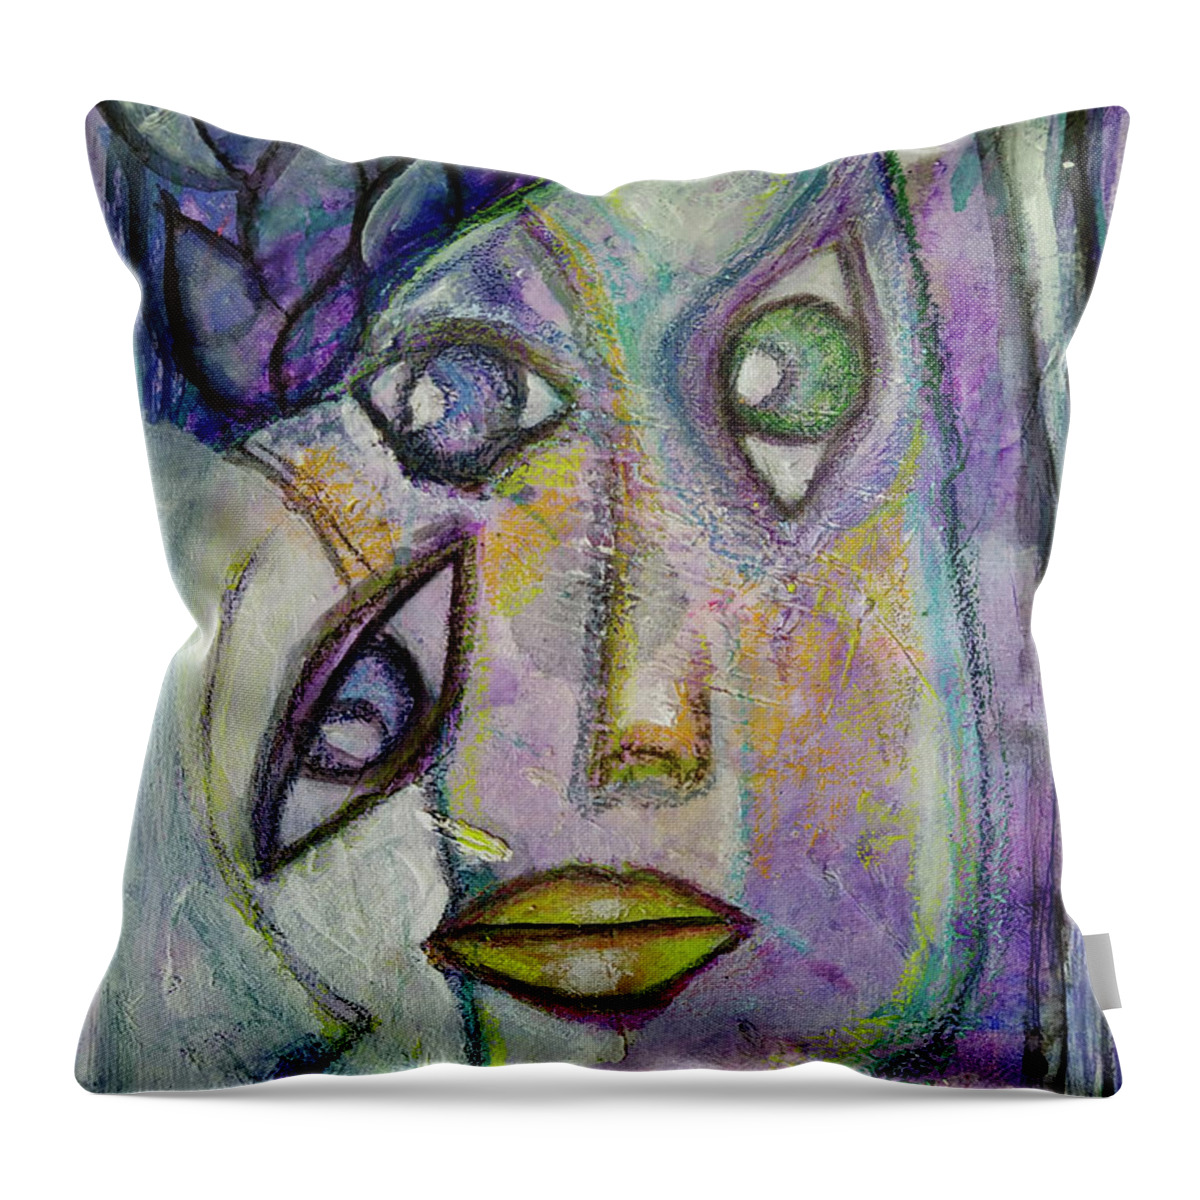 Tete A Tete Throw Pillow featuring the mixed media Tete a Tete by Mimulux Patricia No